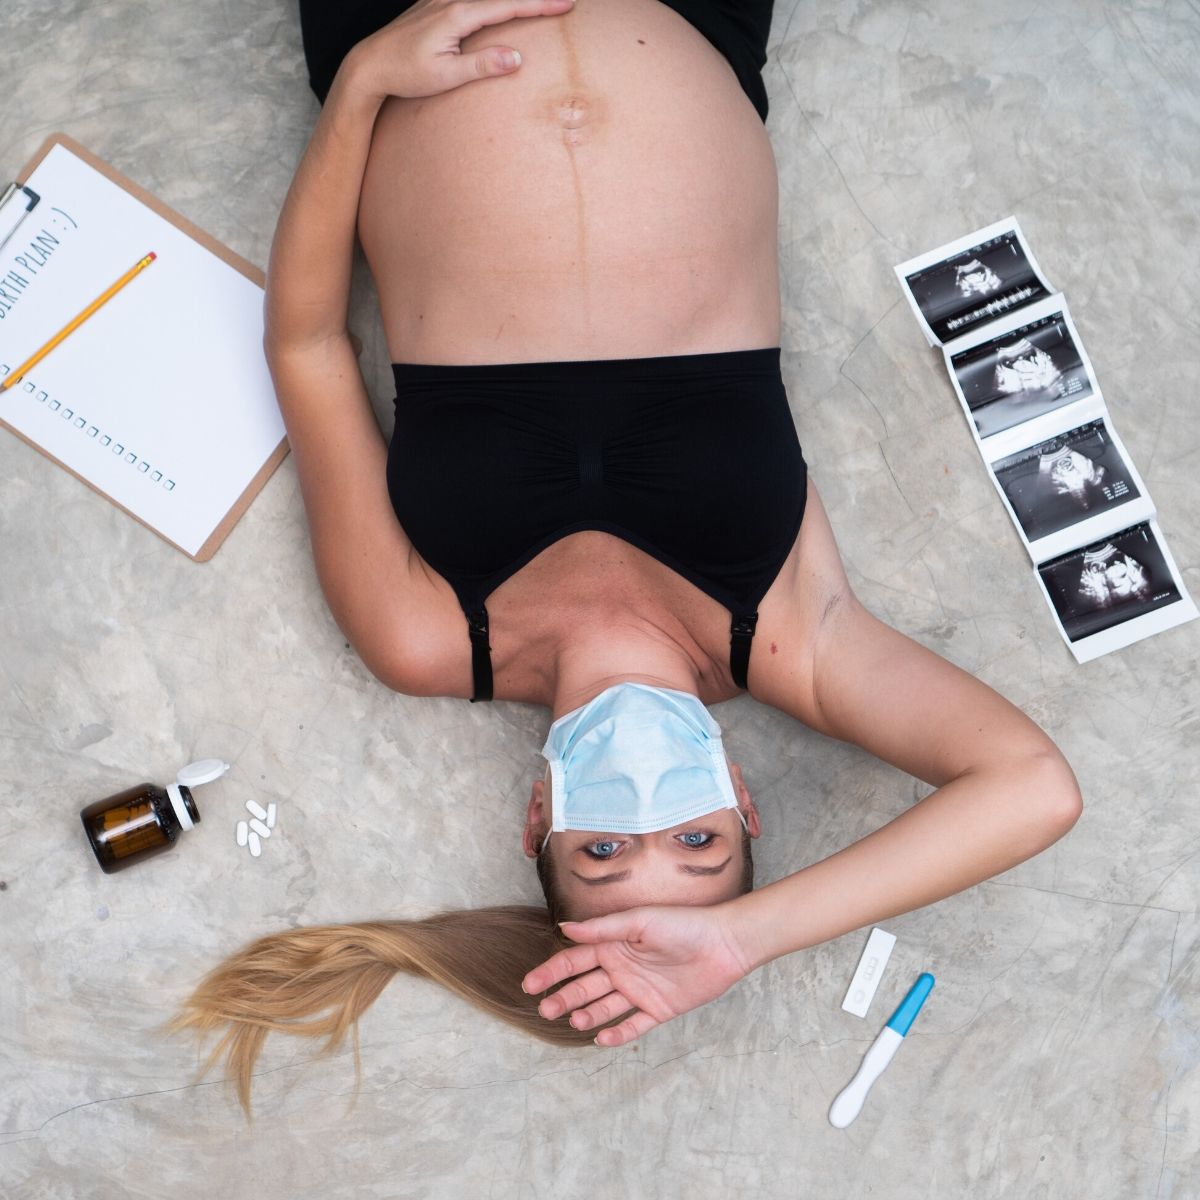 pregnancy woman wearing a face mask with a pregnancy test, sonogram, and birth plan notes laying near her